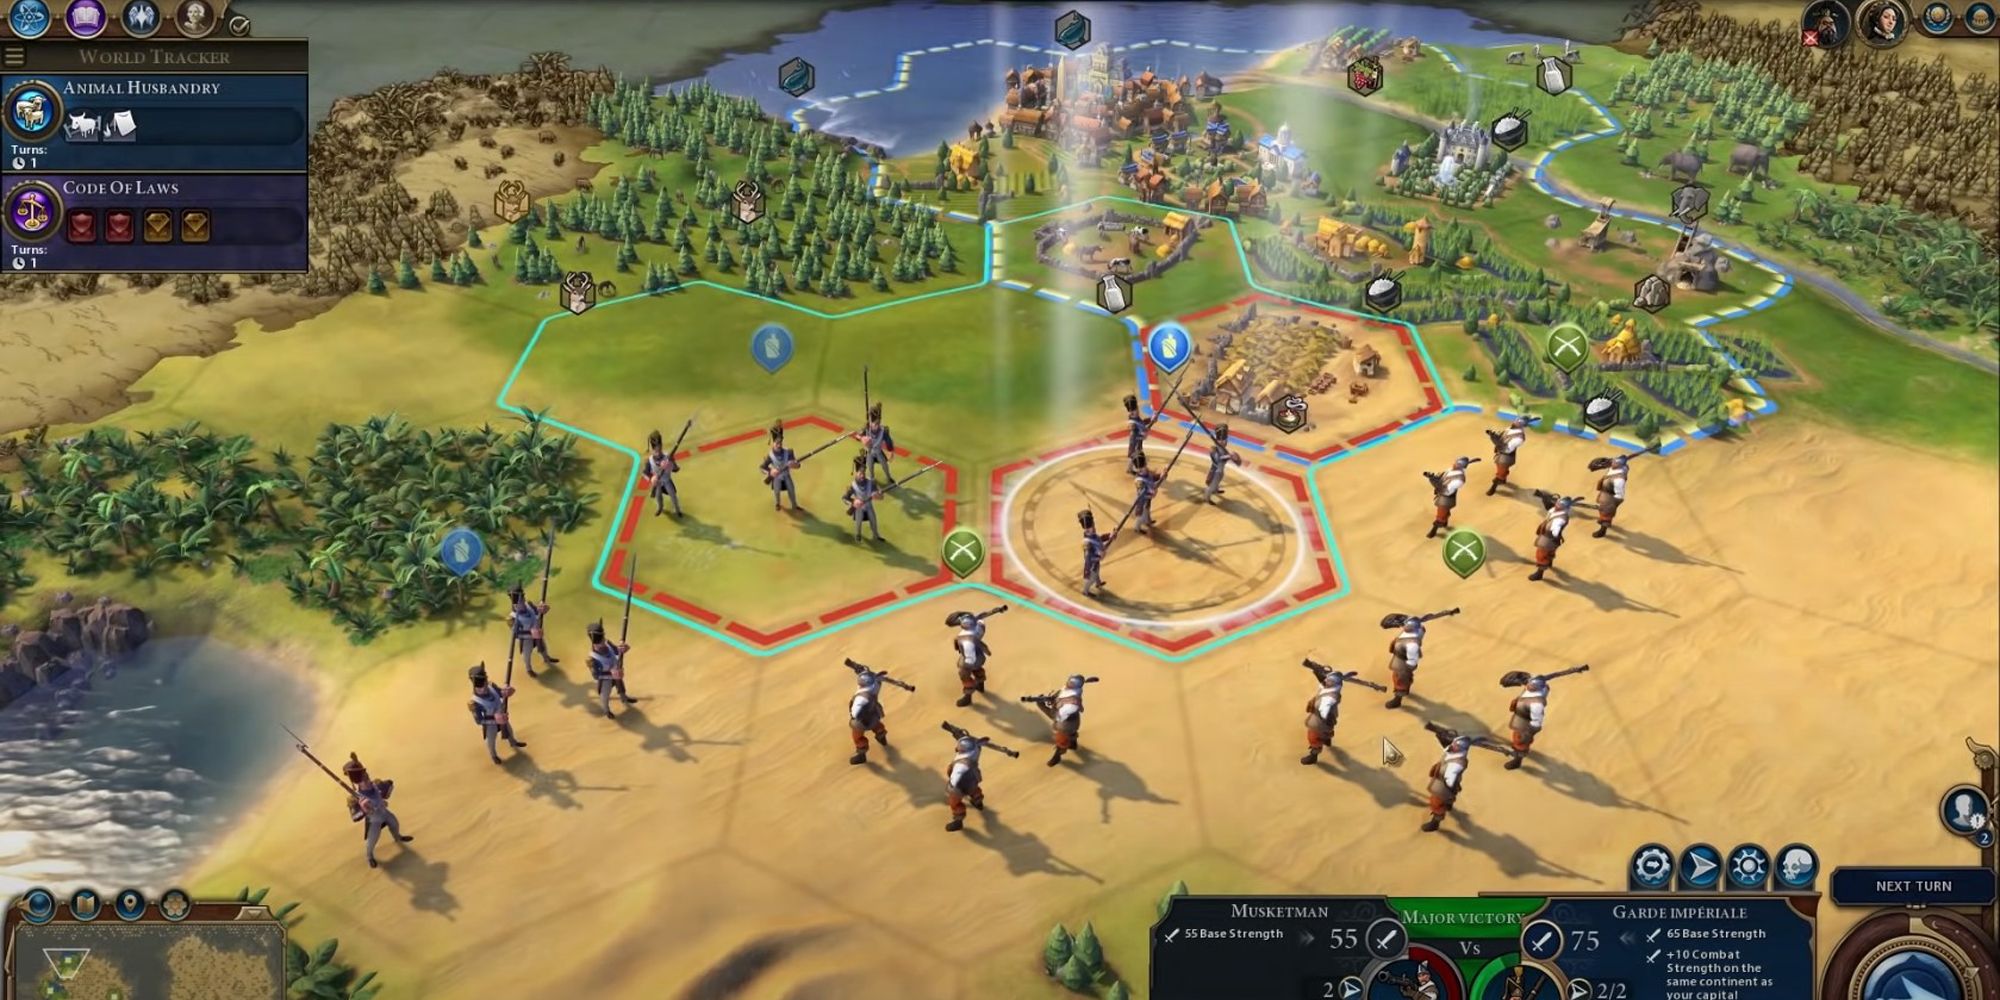 close-up of the map in Civilisation 6, showing soldiers and a nearby town